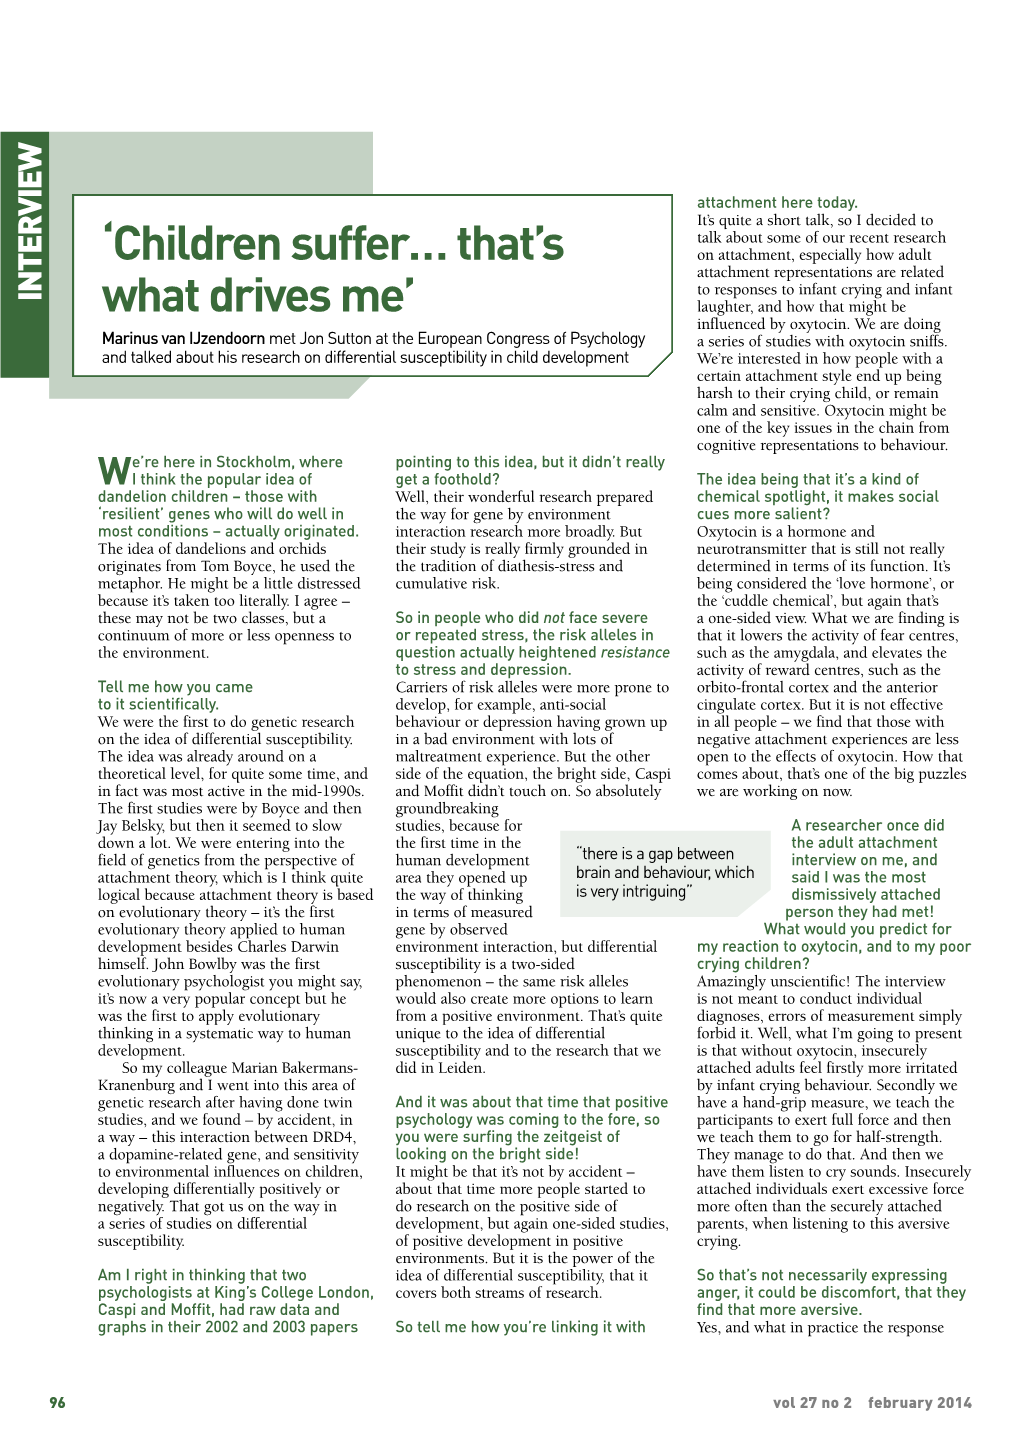 'Children Suffer… That's What Drives